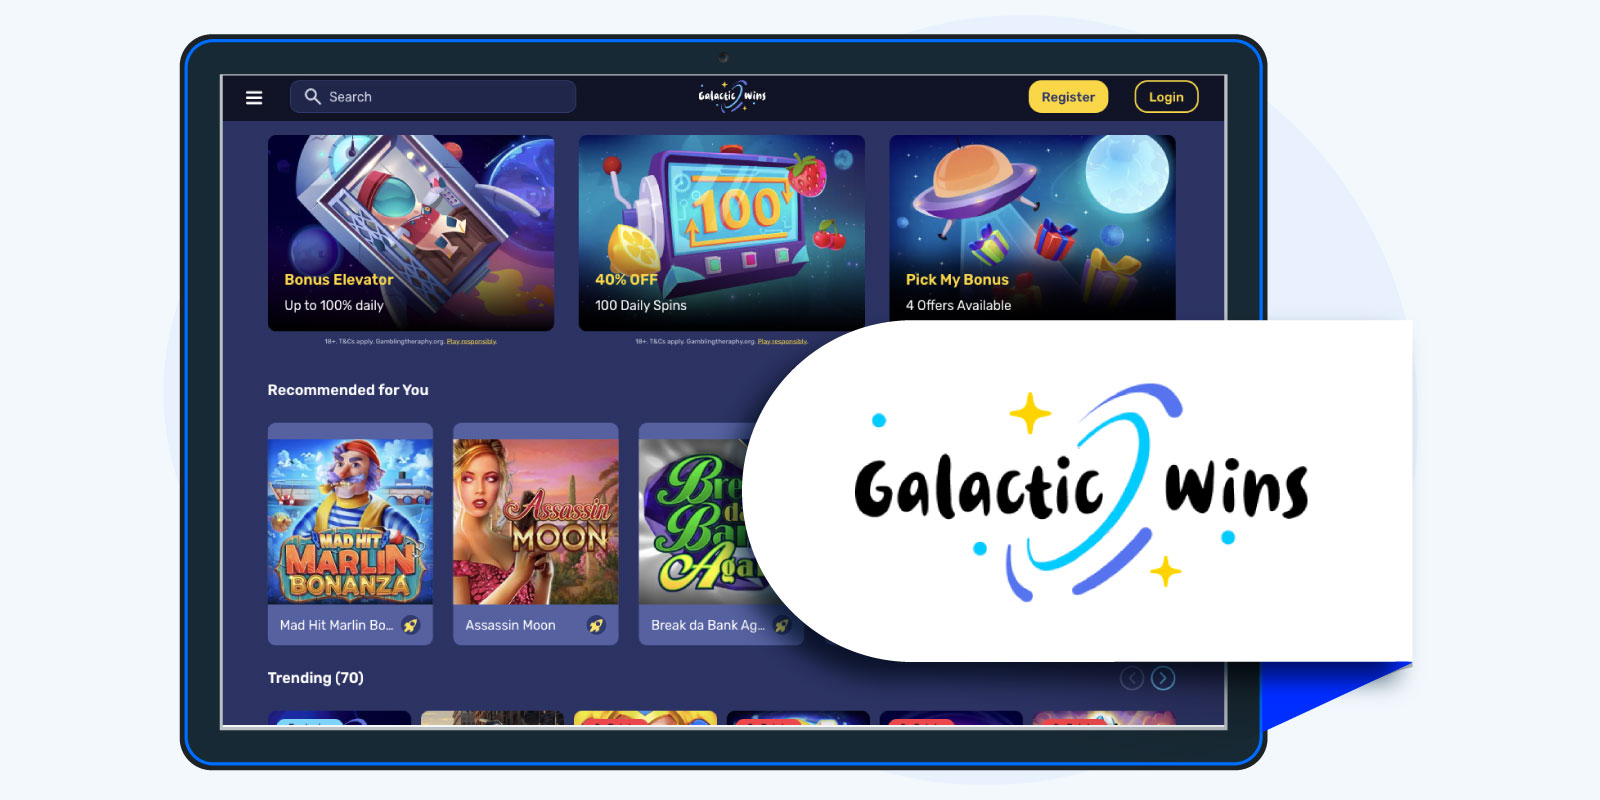 Galactic Wins Casino - 1st Best Casino with Free Spins No Deposit